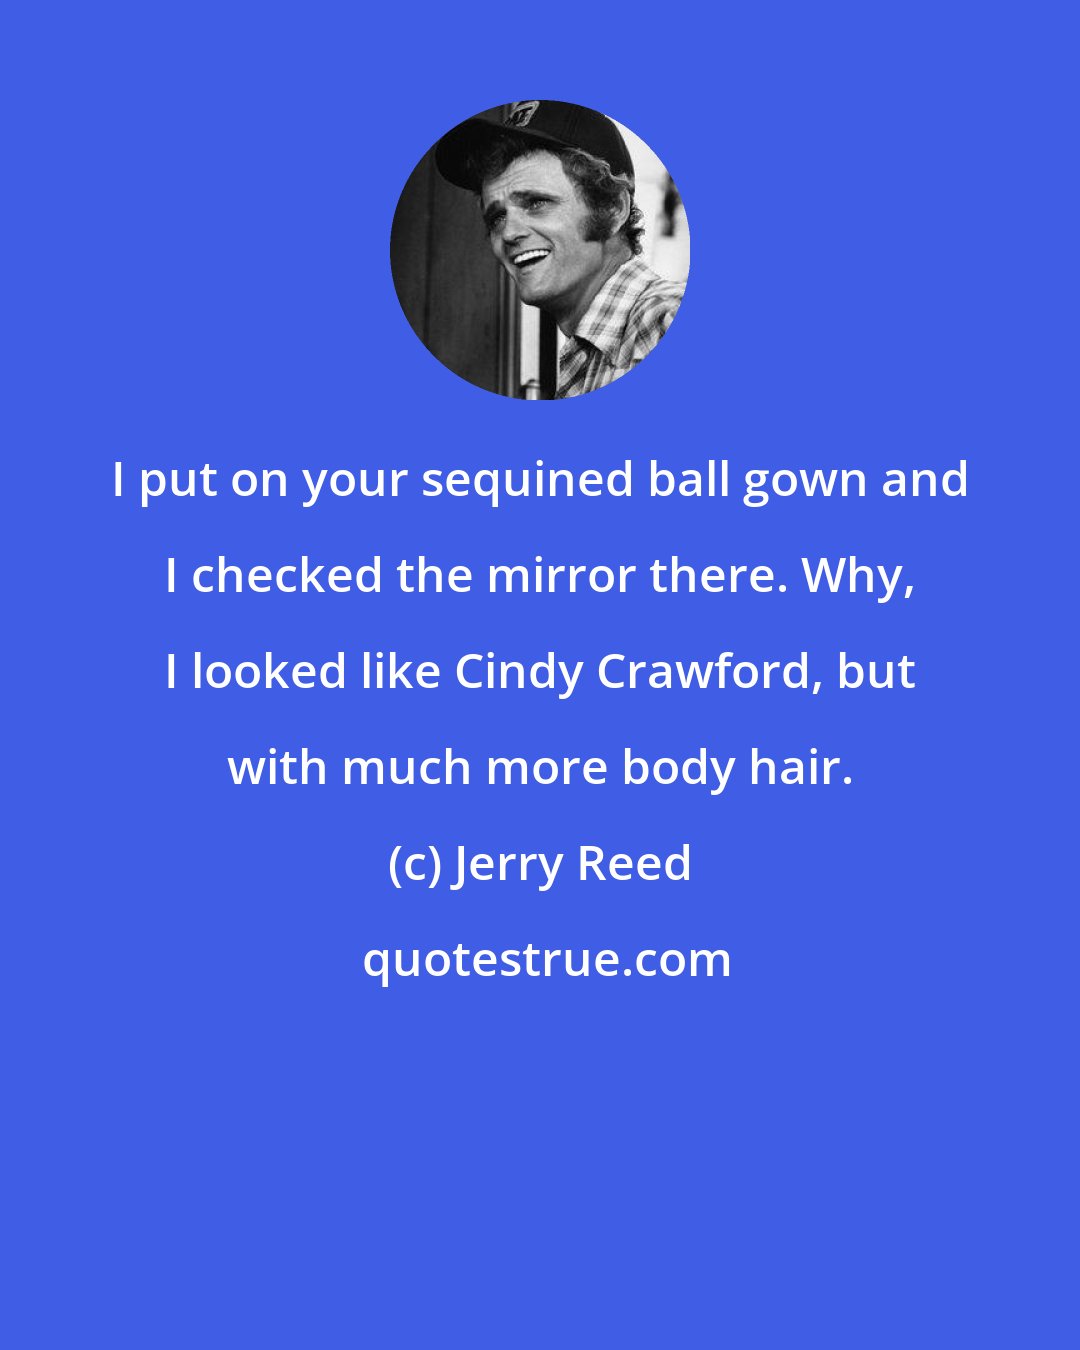 Jerry Reed: I put on your sequined ball gown and I checked the mirror there. Why, I looked like Cindy Crawford, but with much more body hair.